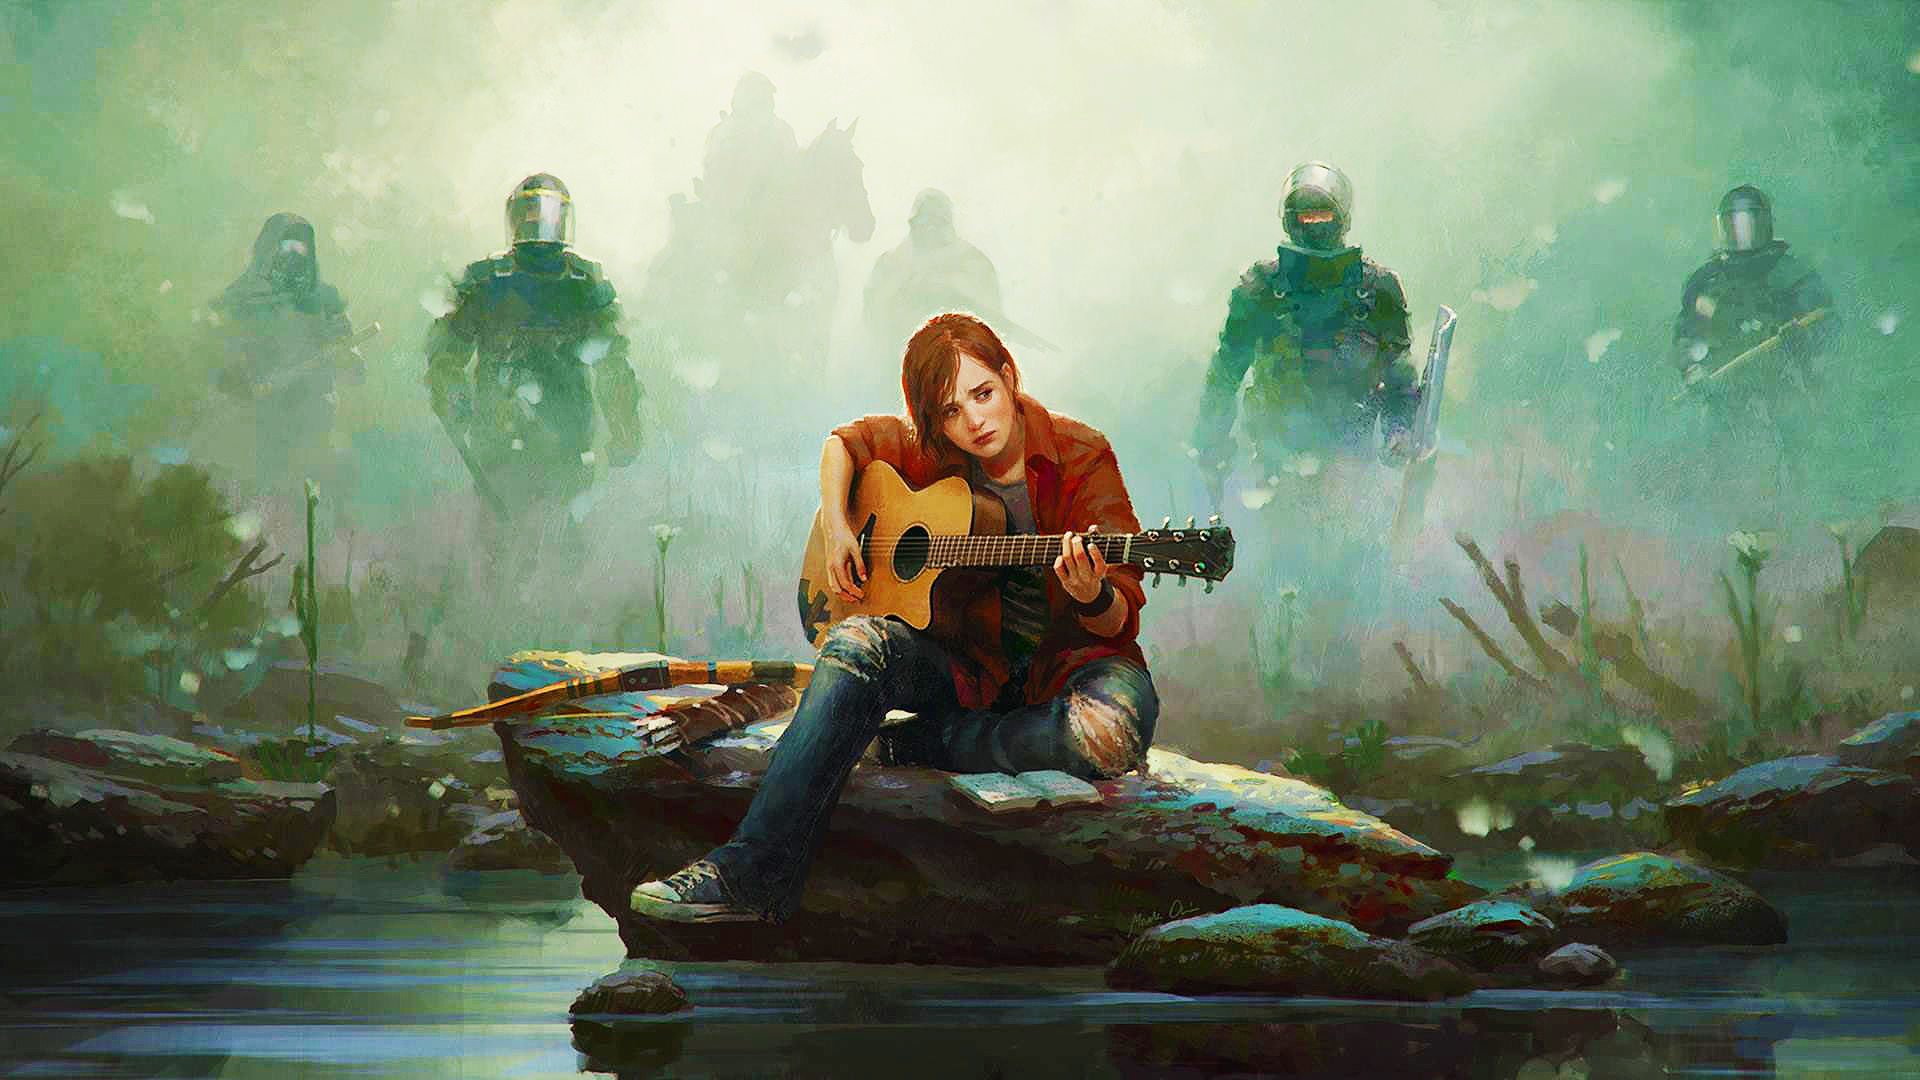 Free Wallpapers: The Last of Us PS3 Game